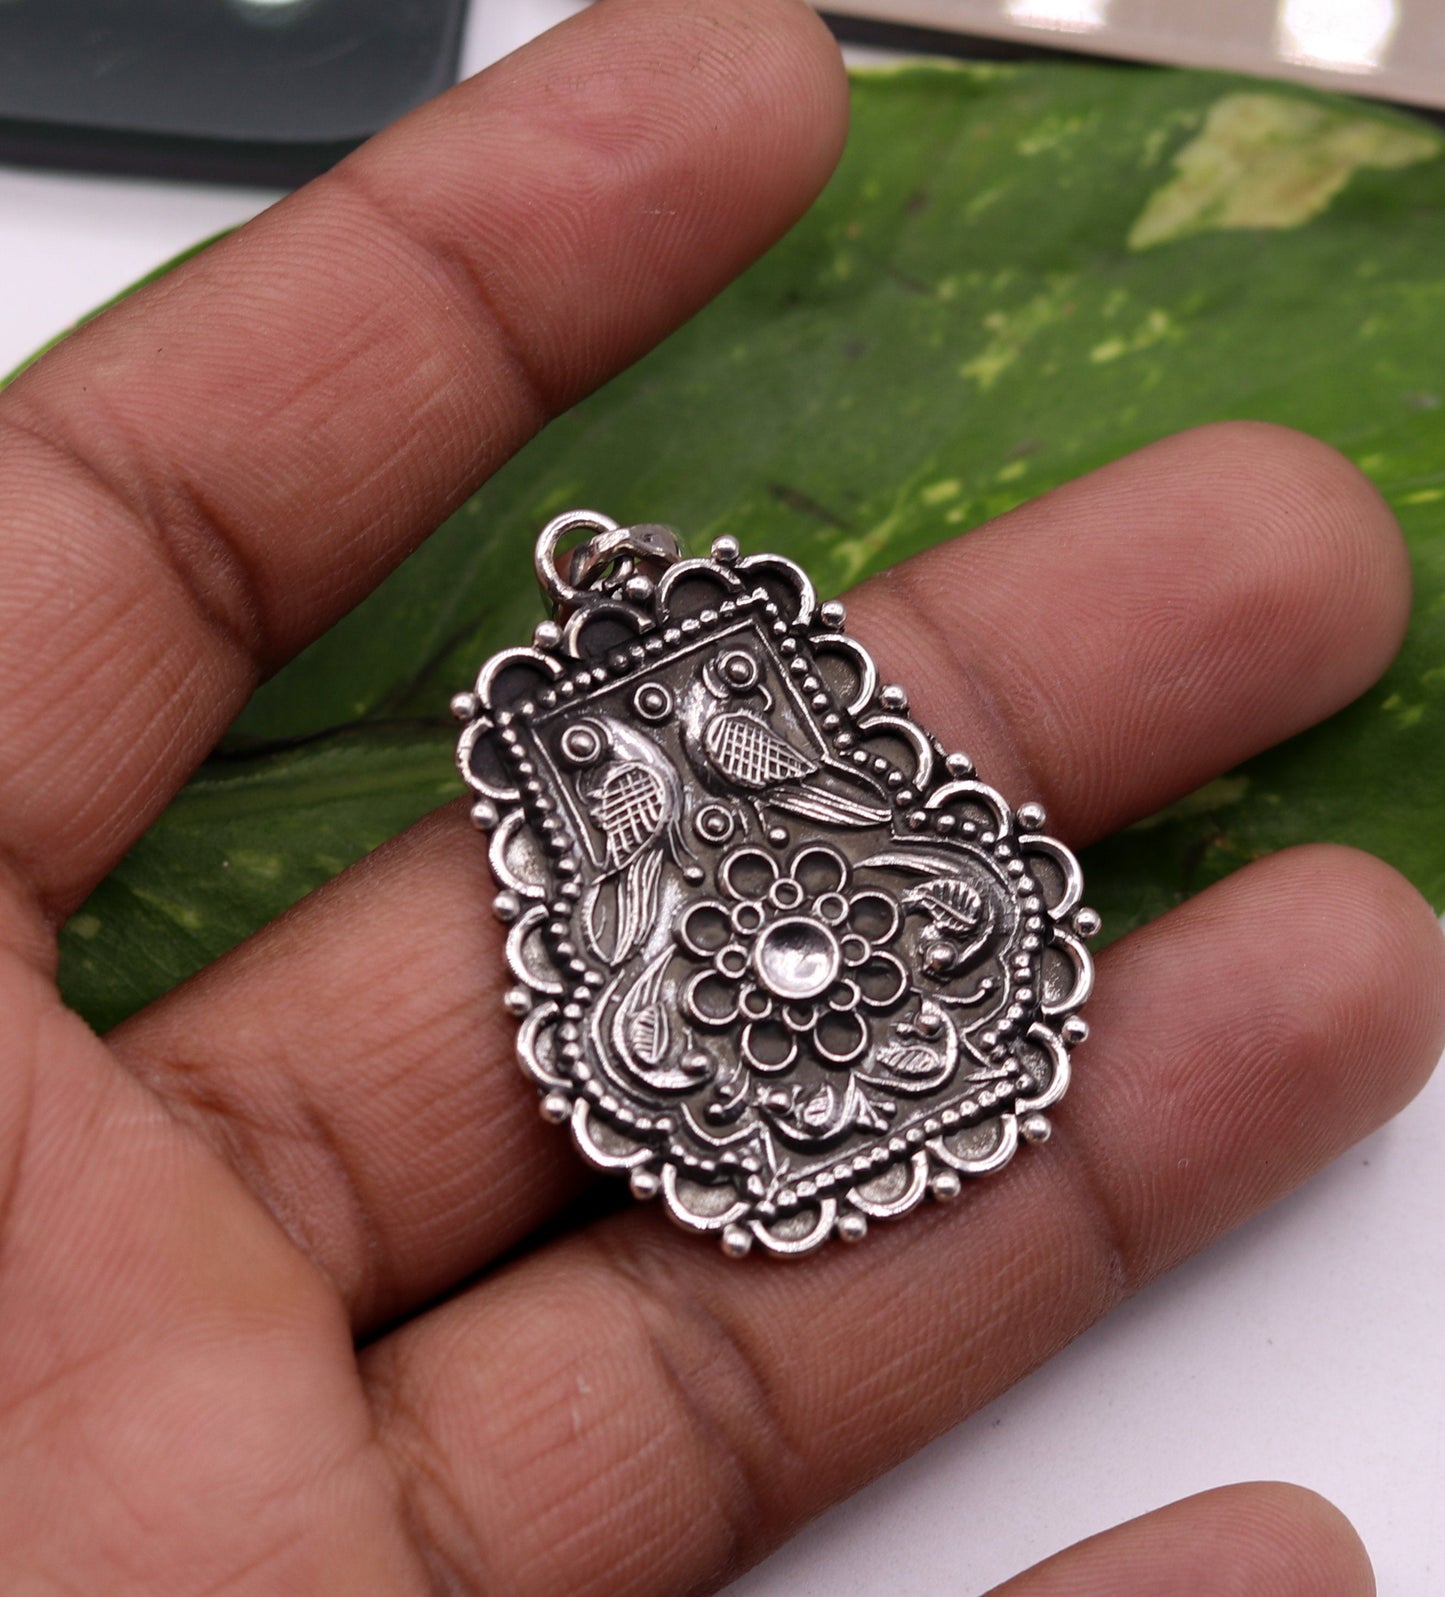 Vintage antique design handmade 925 sterling silver amazing design tribal temple jewelry belly dance jewelry  pendant necklace nsp199 - TRIBAL ORNAMENTS